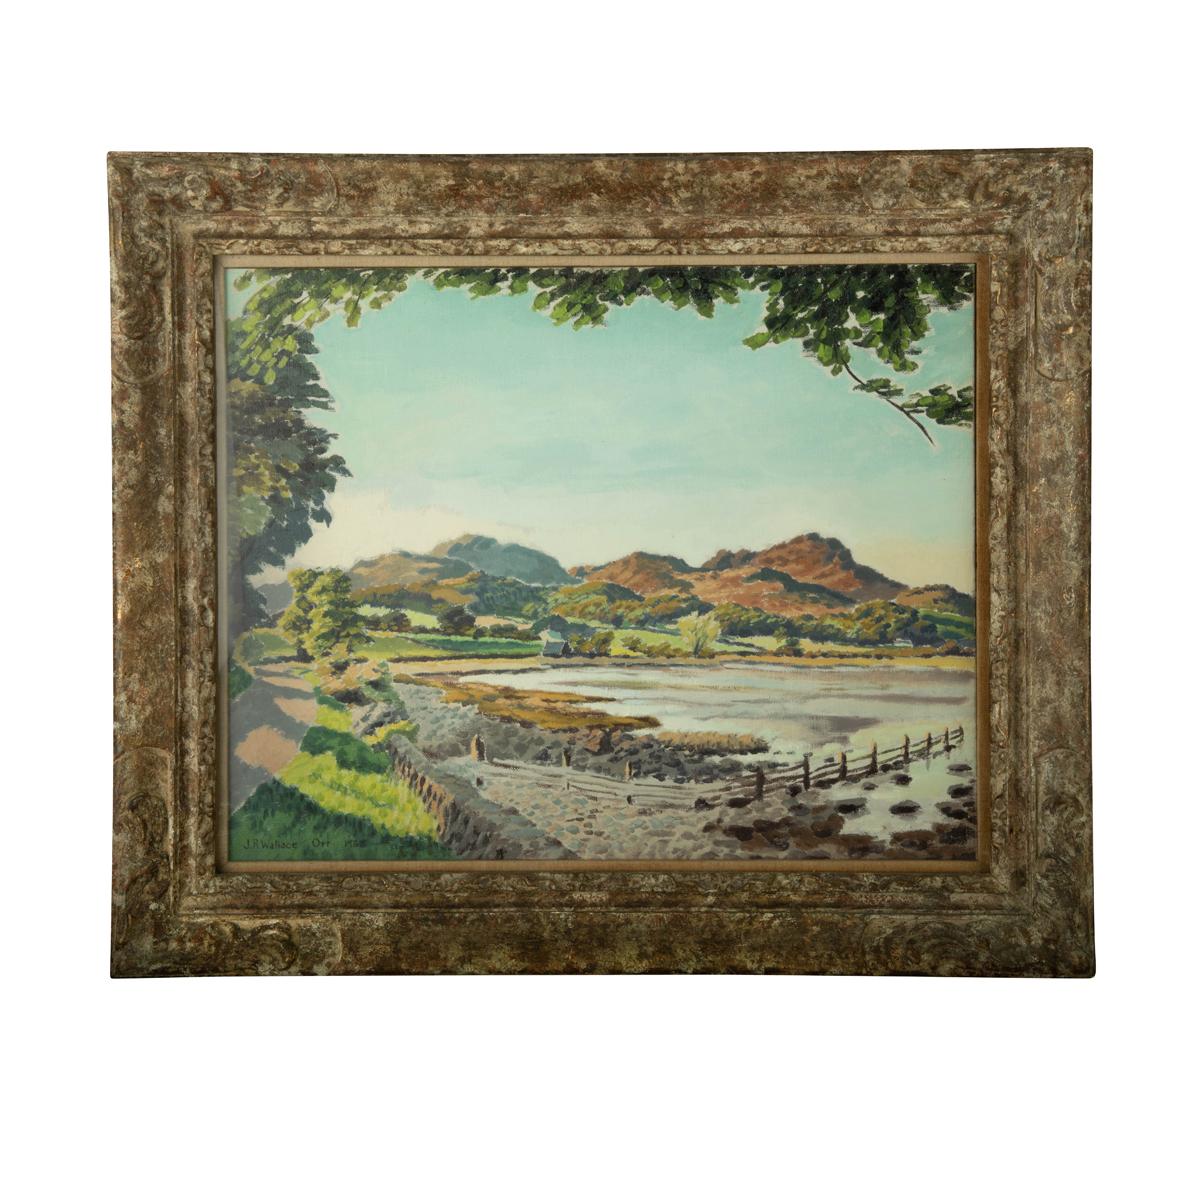 Two landscape oil paintings on canvas by J R Wallace Orr, 1938, both showing Scottish coastal scenes with labels on the reverse from ‘Pearson and Westergaard Ltd, Fine Art Dealers, 28 West Nile Street, Glasgow, CI’ one titled ‘Ocharton Bay’ and the